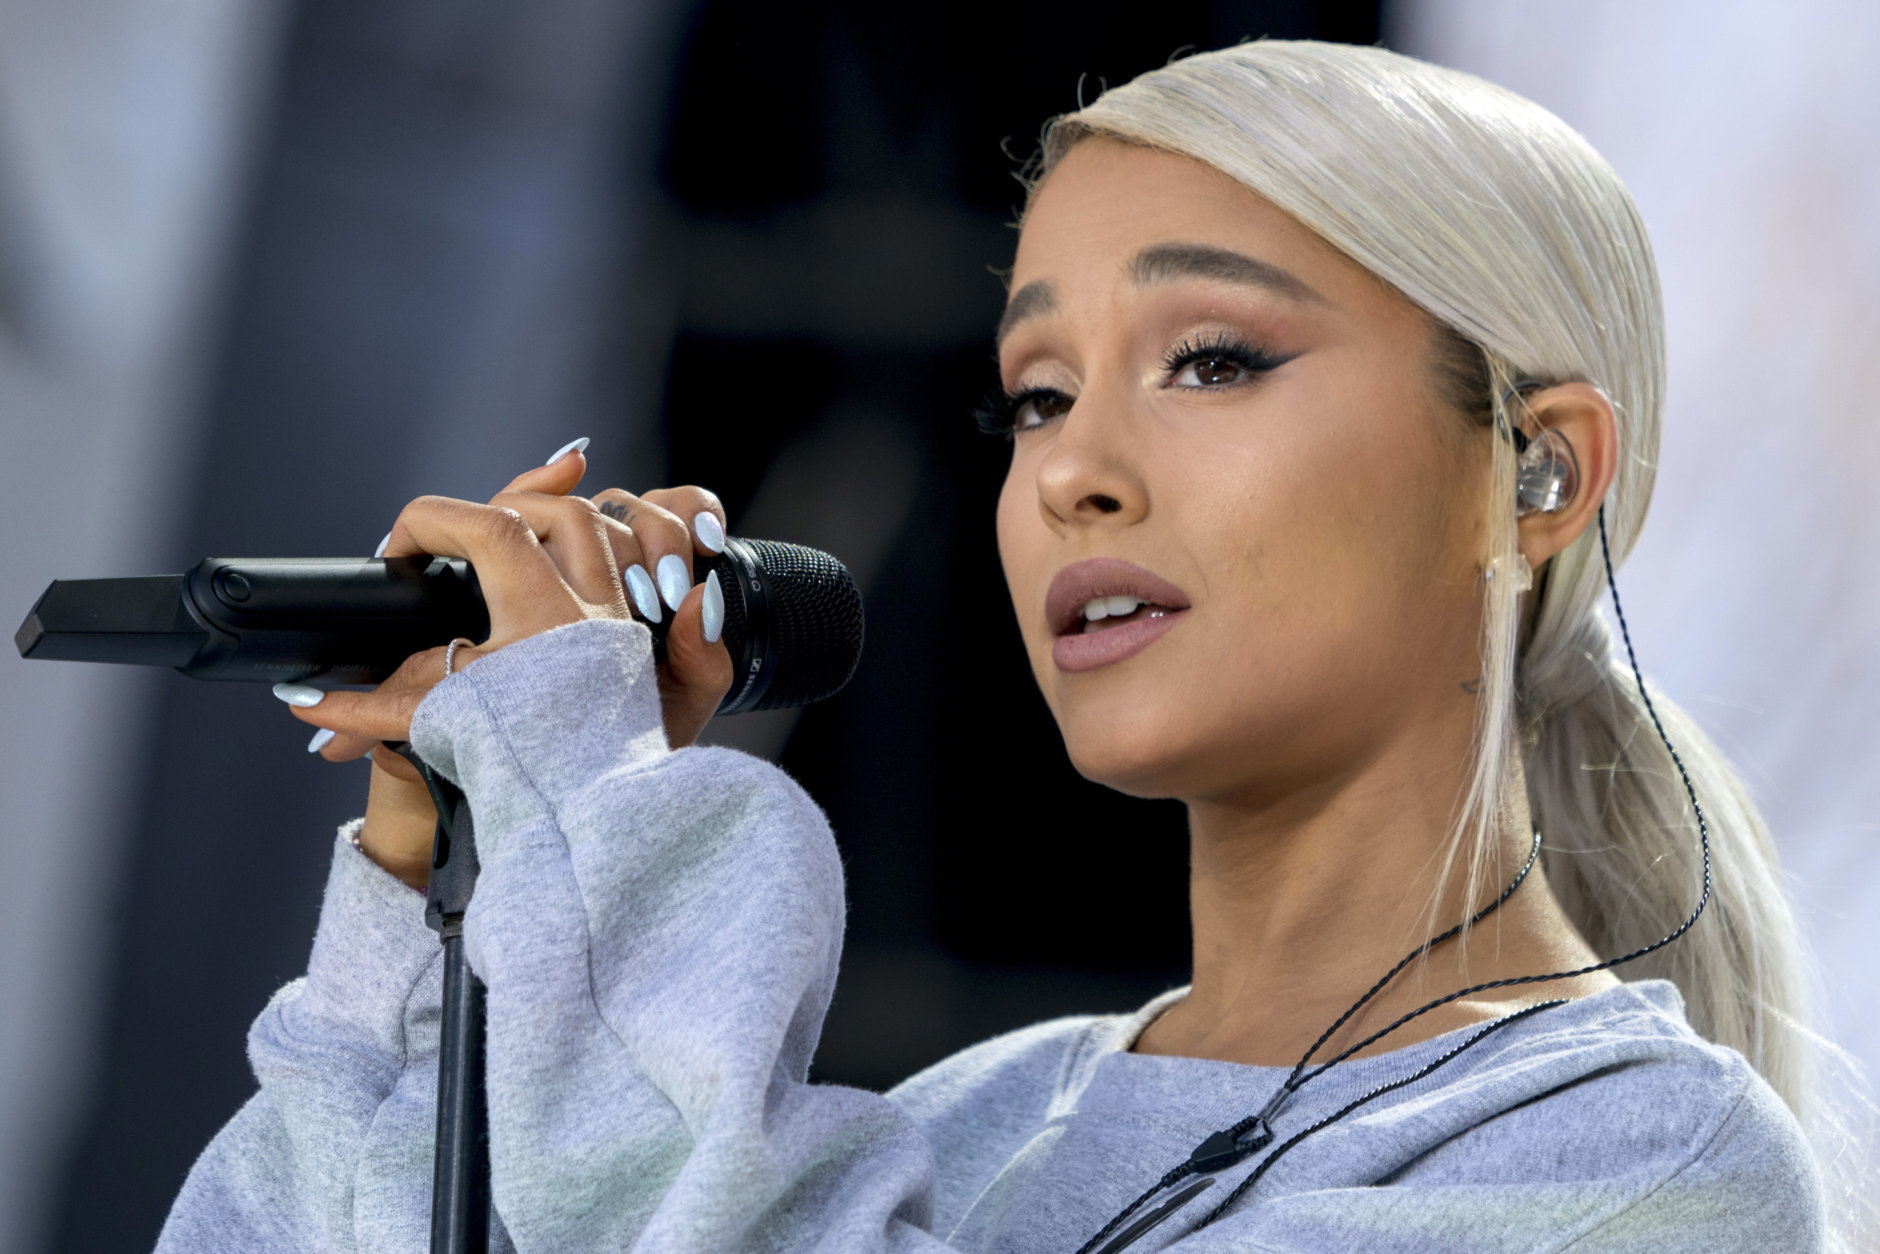 Ariana Grande performs "Be Alright" during the "March for Our Lives" rally in support of gun control in Washington, Saturday, March 24, 2018. (AP Photo/Andrew Harnik)